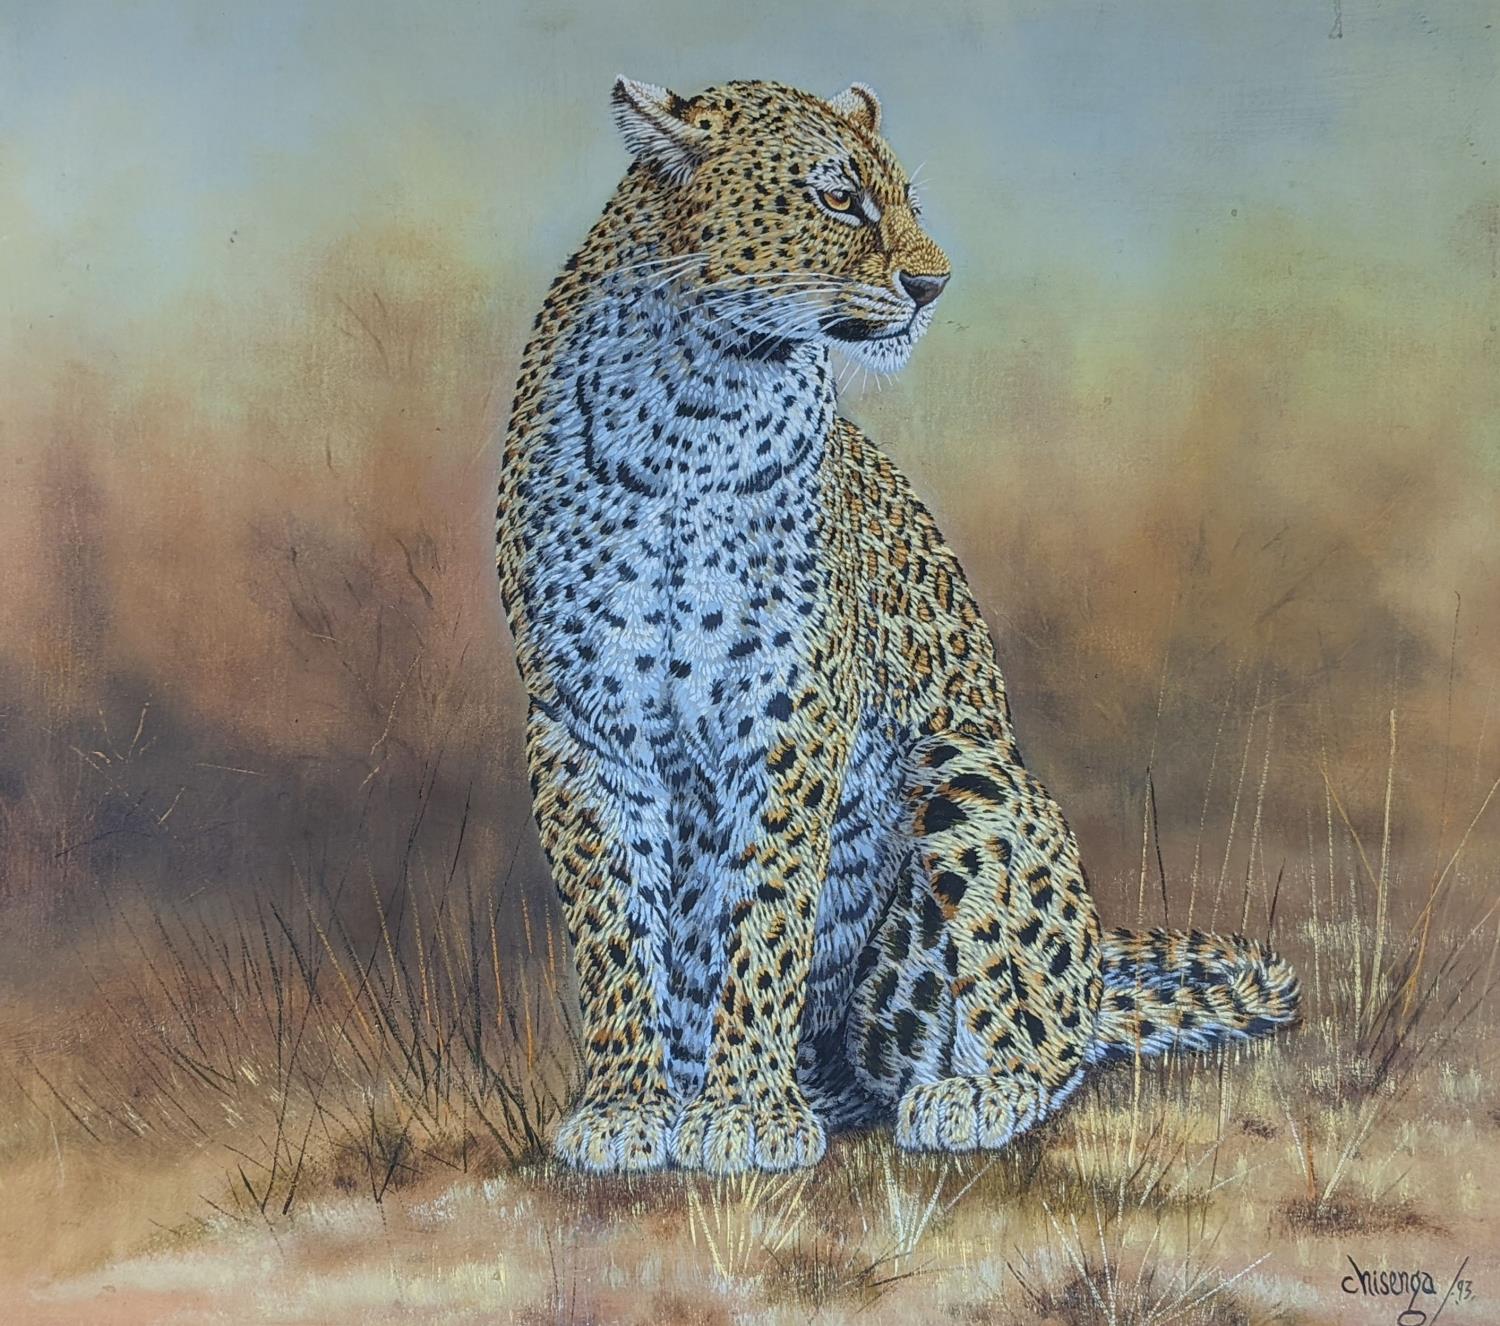 Chisenga, oil on canvas, Study of a leopard, signed and dated '93, 57 x 65cm